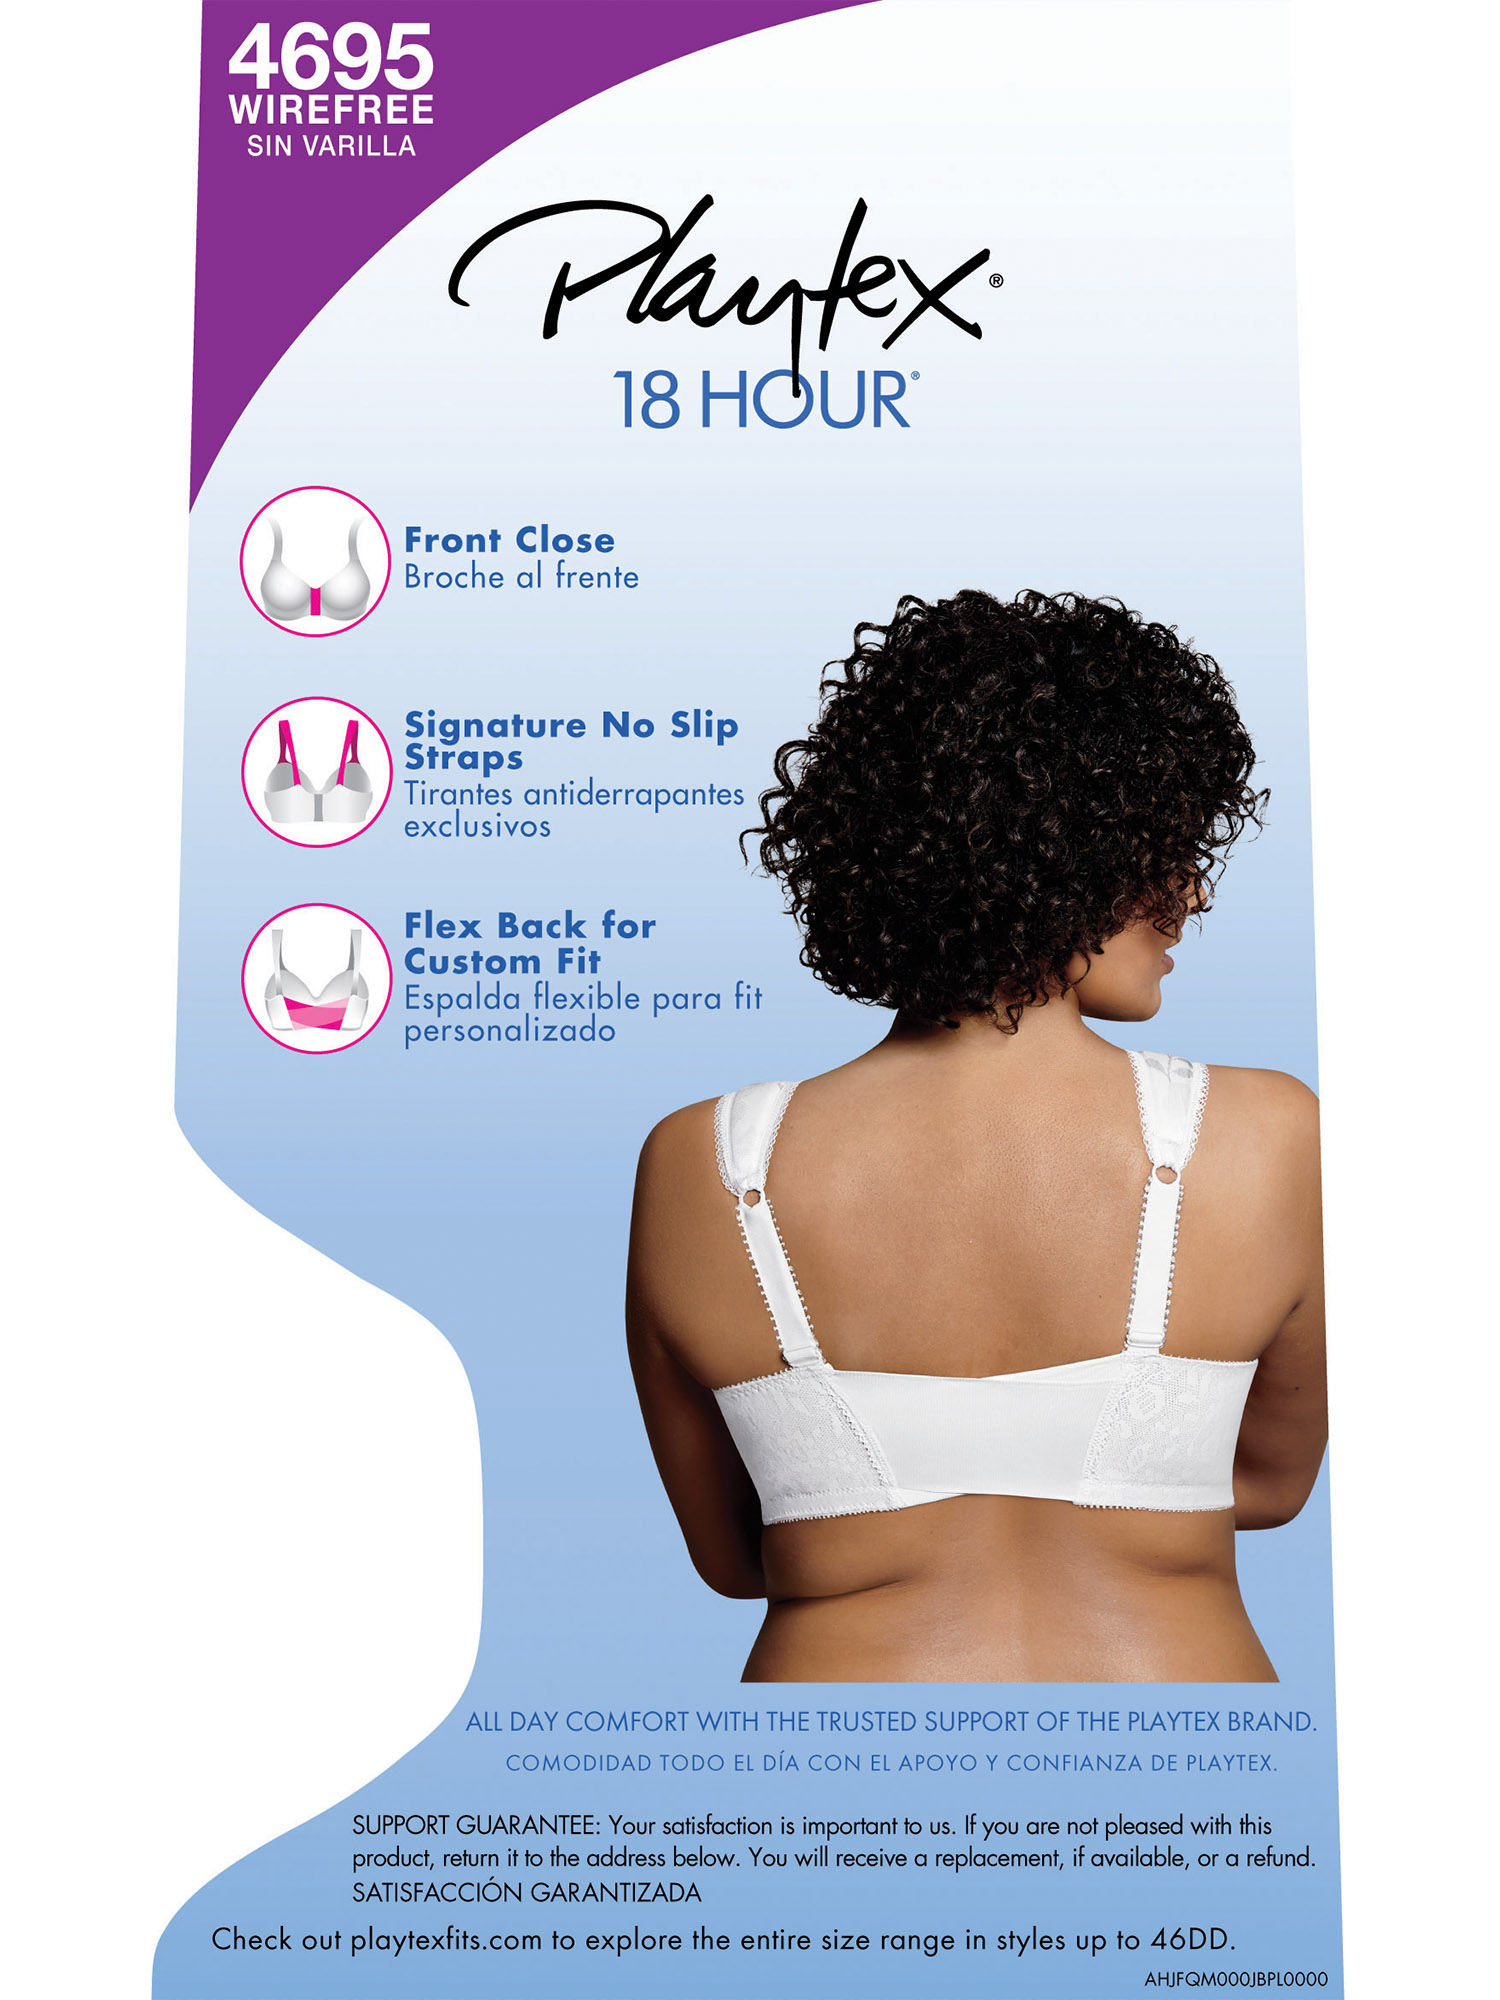 Playtex Womens 18 Hour Front-Close Wire-Free Bra Style-4695 - image 5 of 5